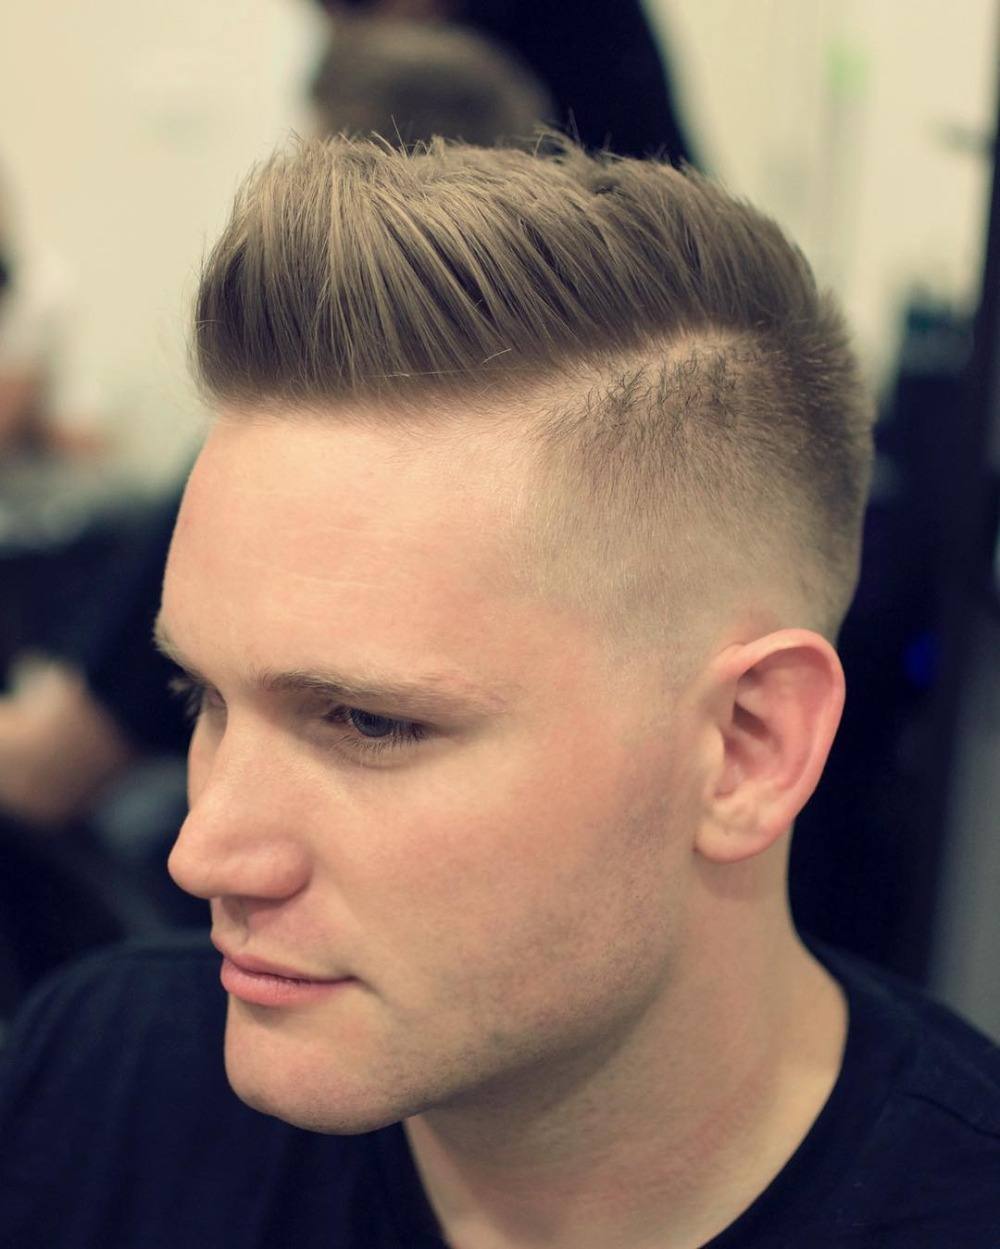 cooler boxing cut with transitional men's haircuts trend